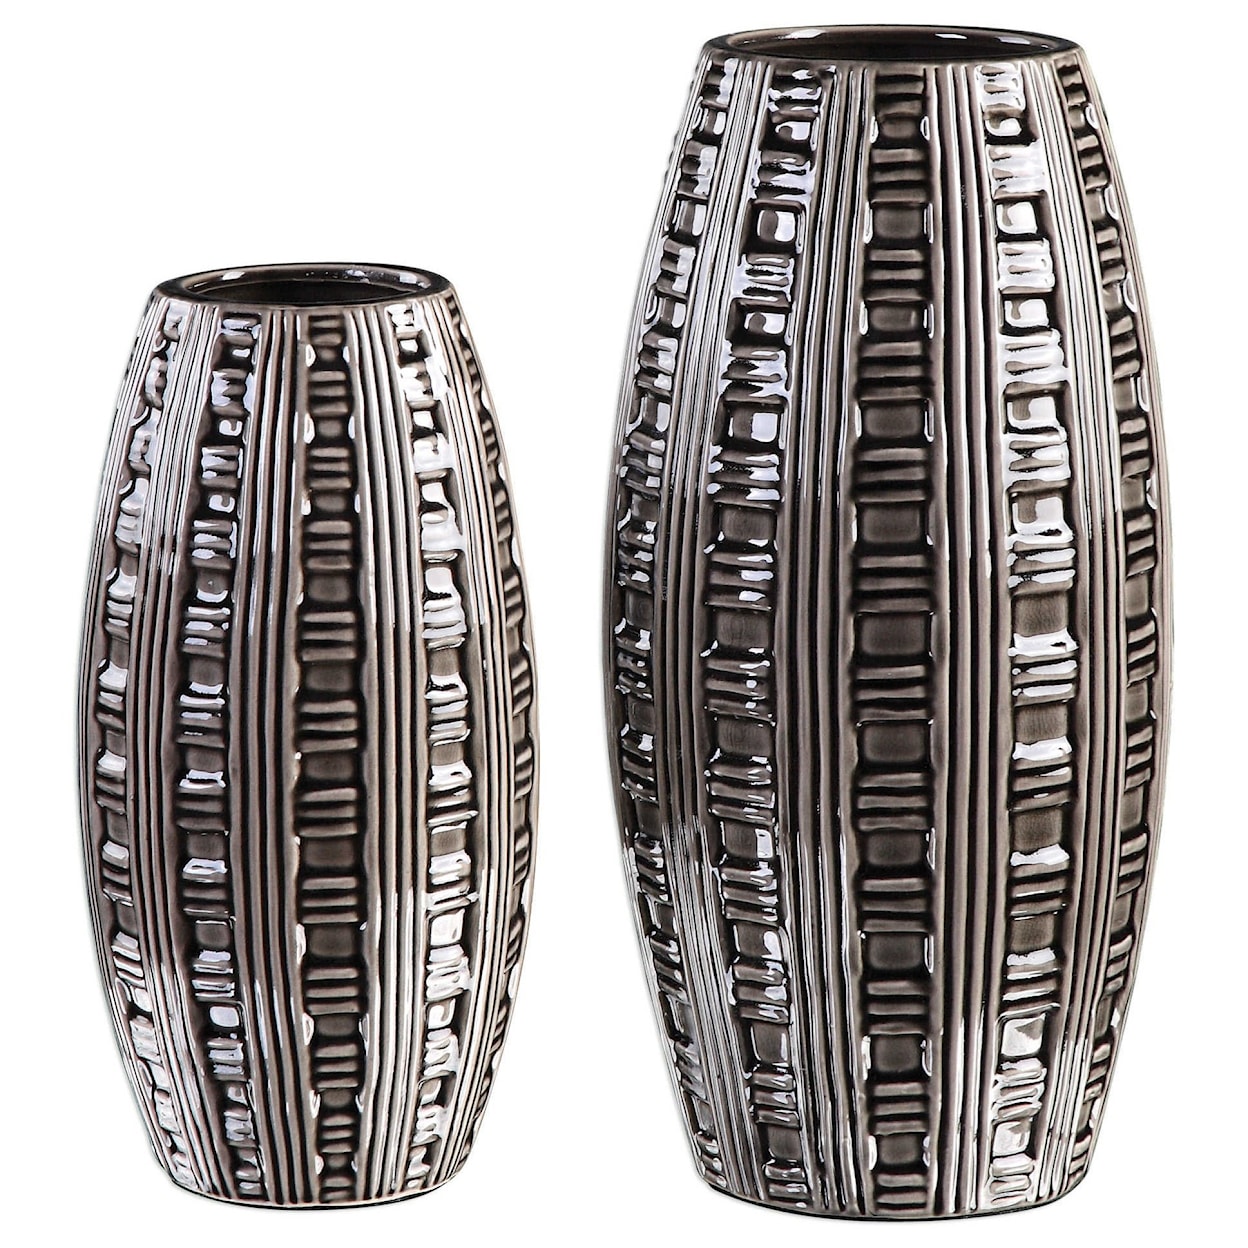 Uttermost Accessories - Vases and Urns Aura Weave Pattern Vases (Set of 2)